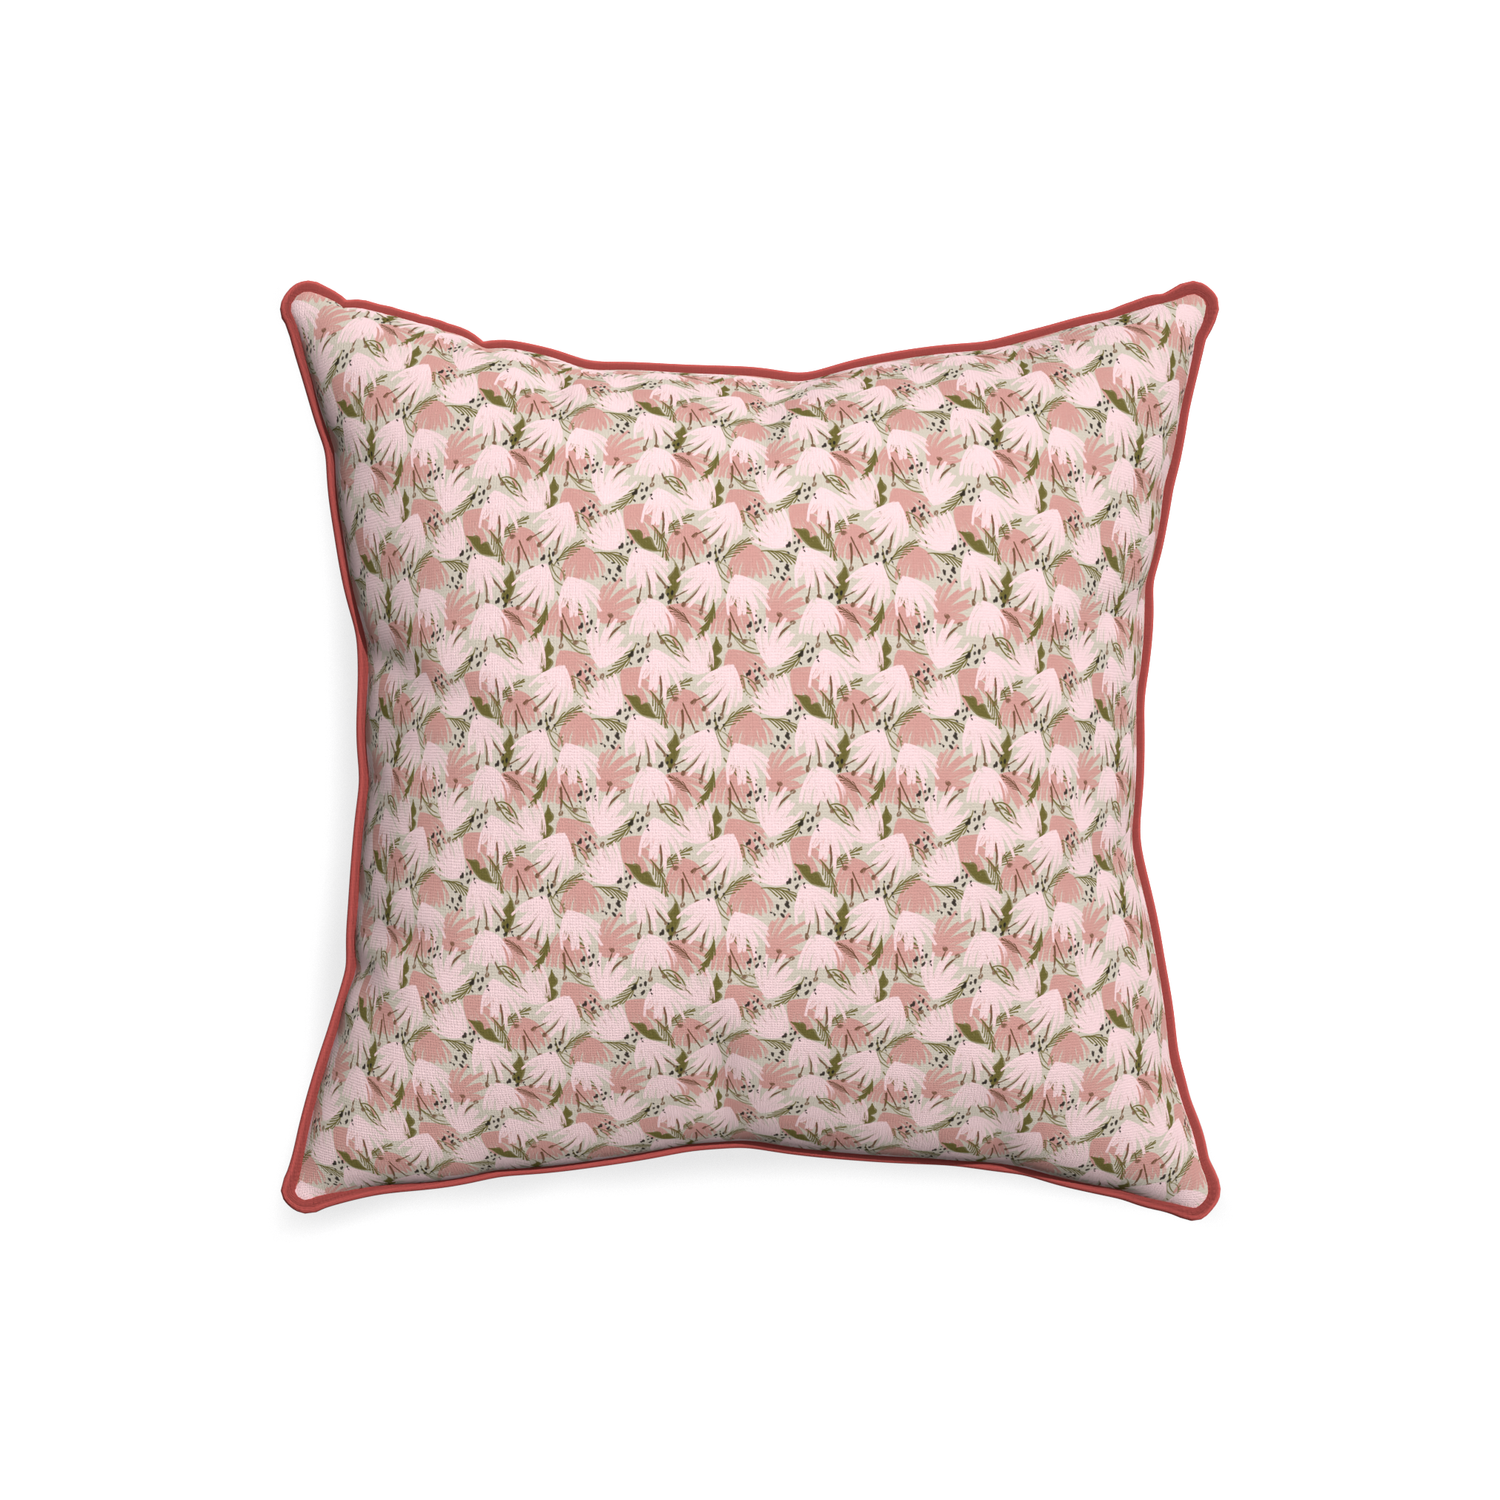 20-square eden pink custom pink floralpillow with c piping on white background